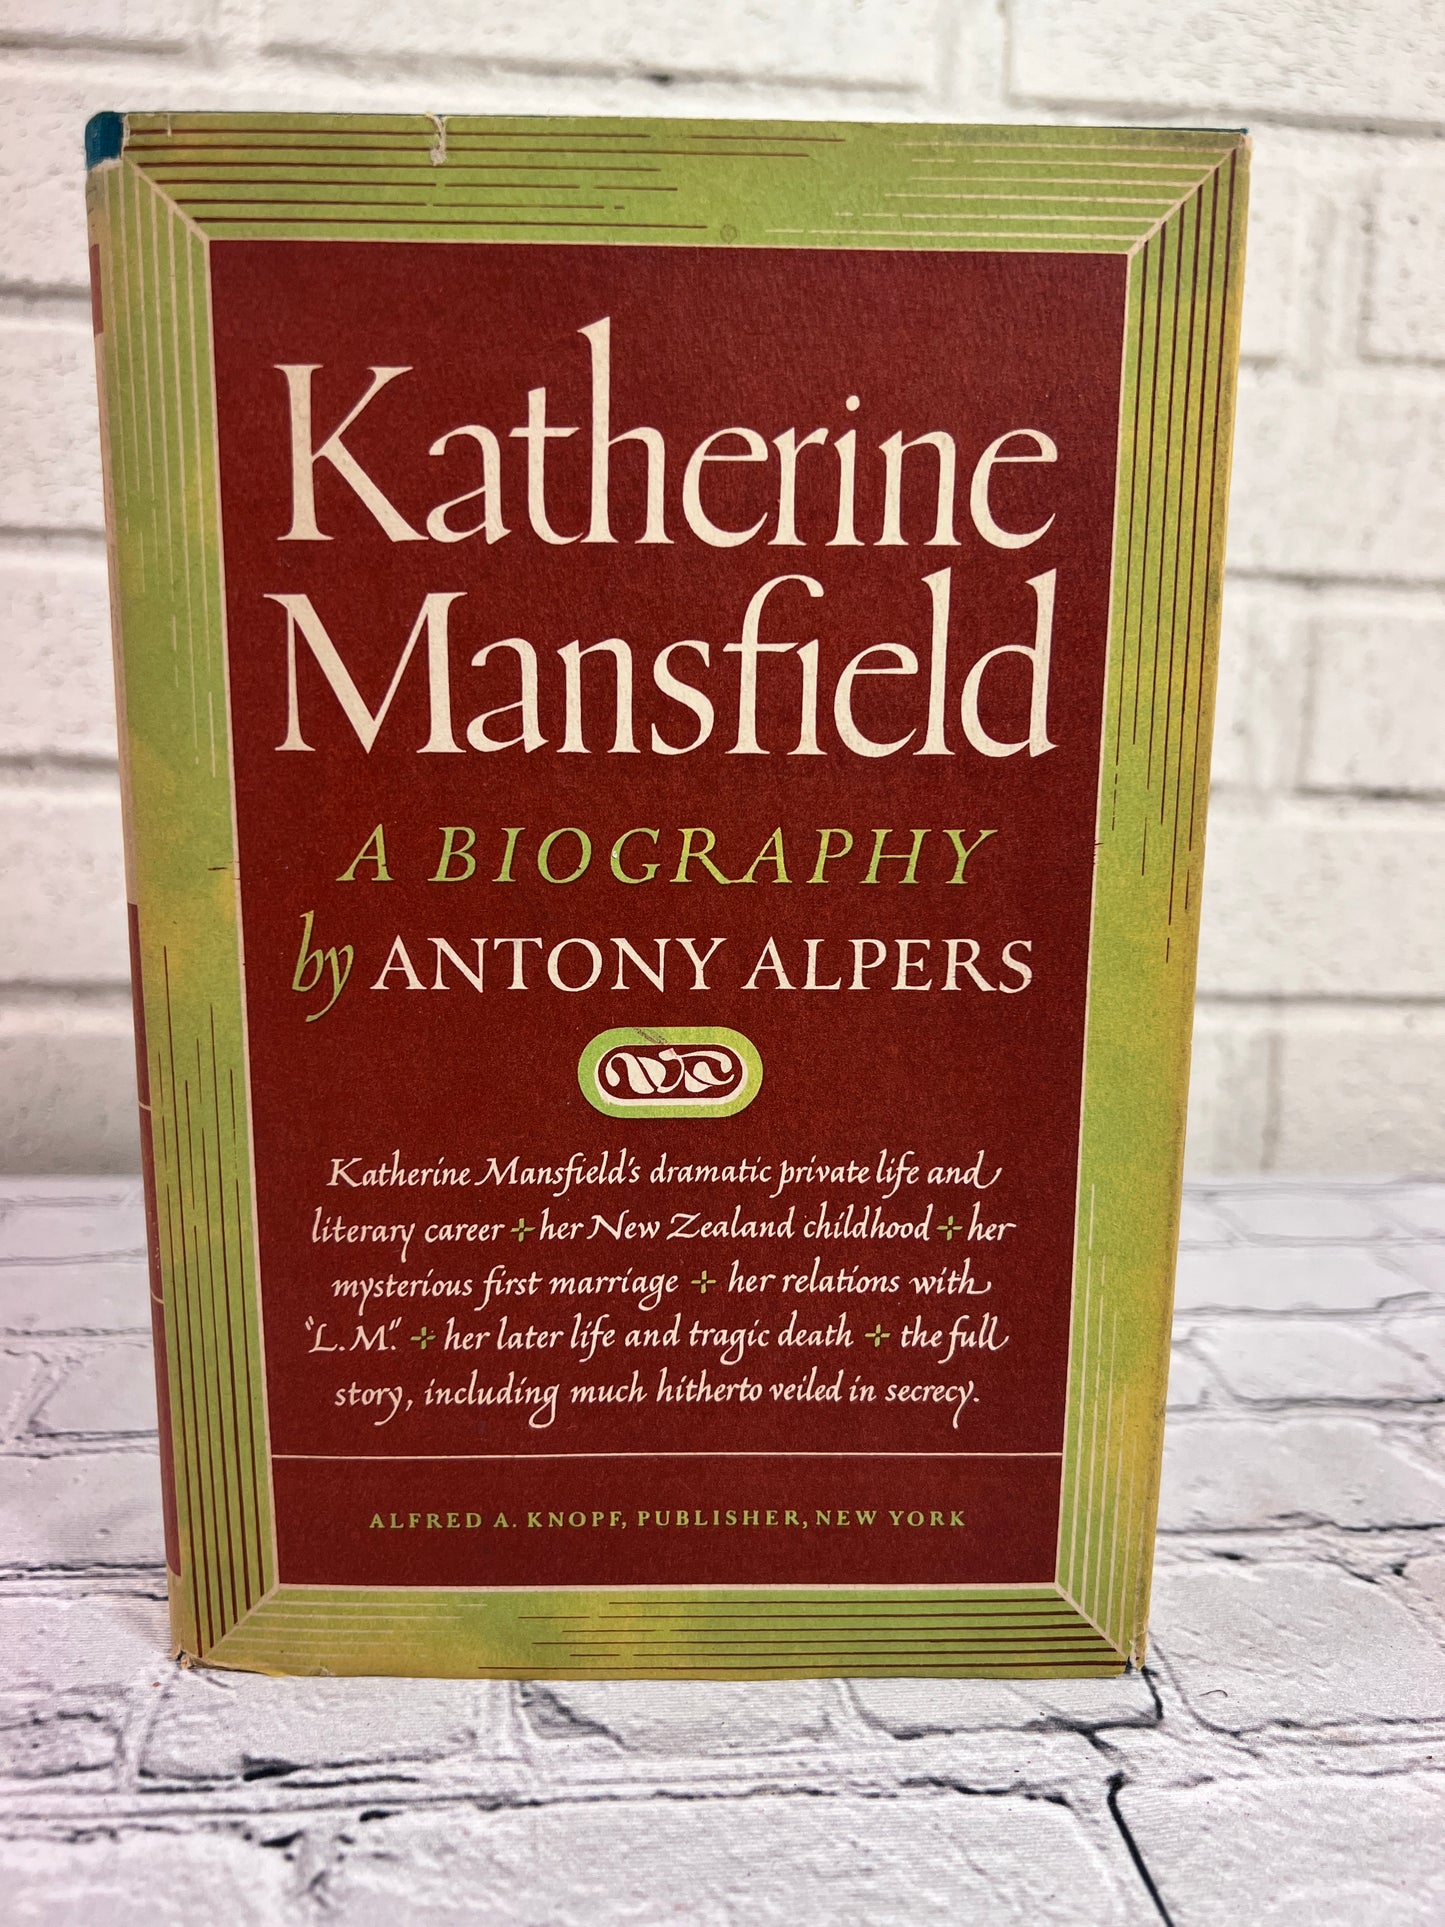 Katherine Mansfield A Biography by Antony Alpers [1954 · 2nd Printing]